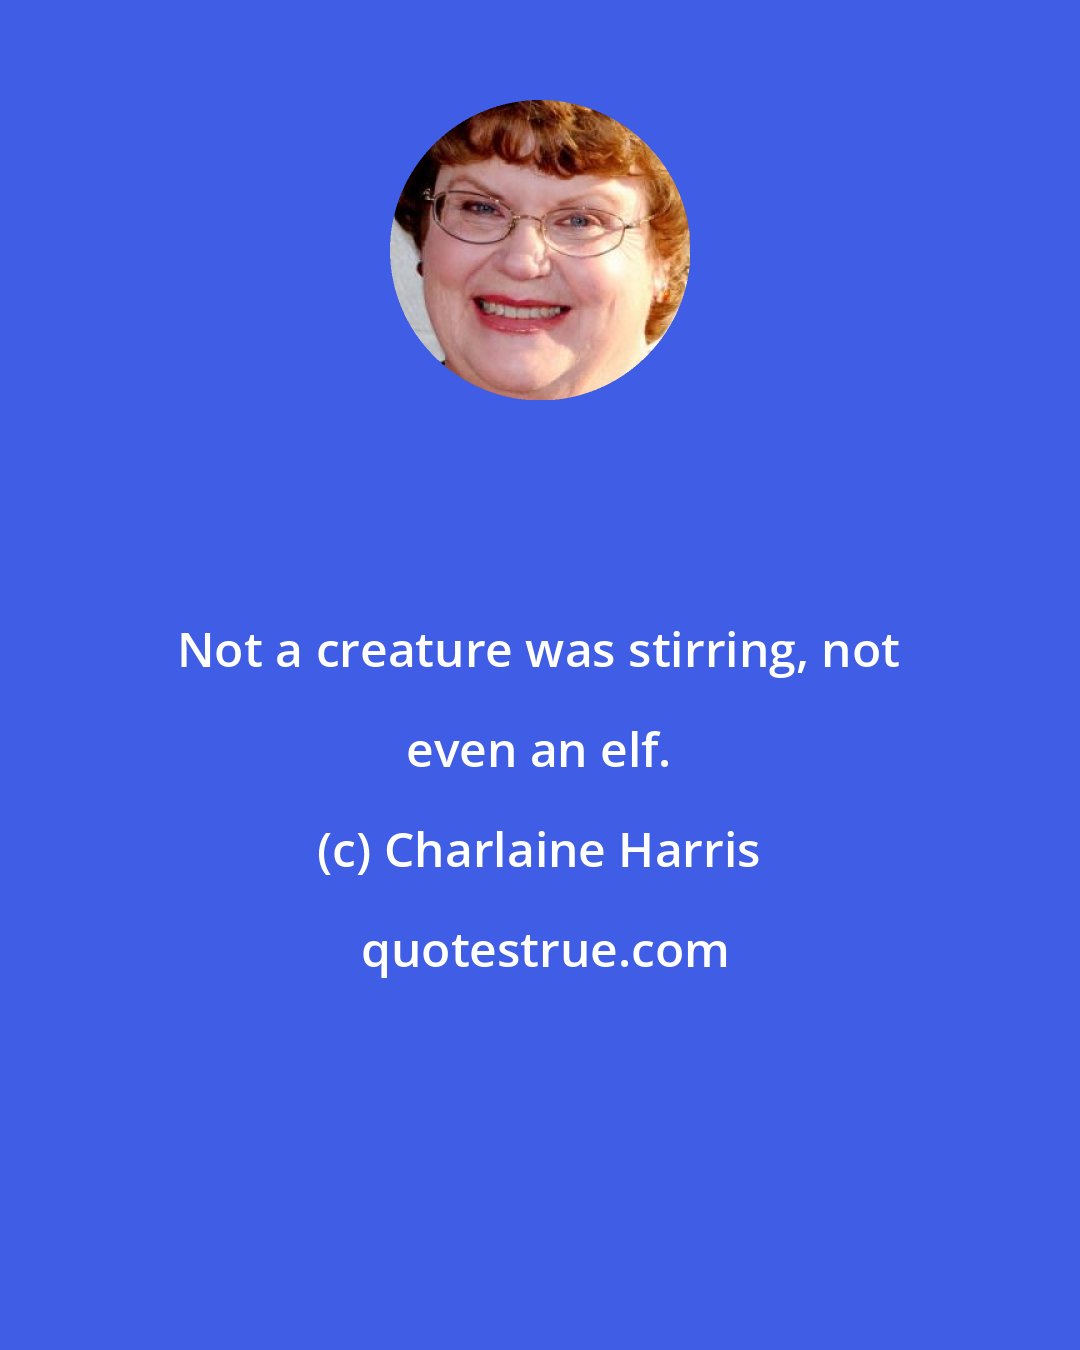 Charlaine Harris: Not a creature was stirring, not even an elf.